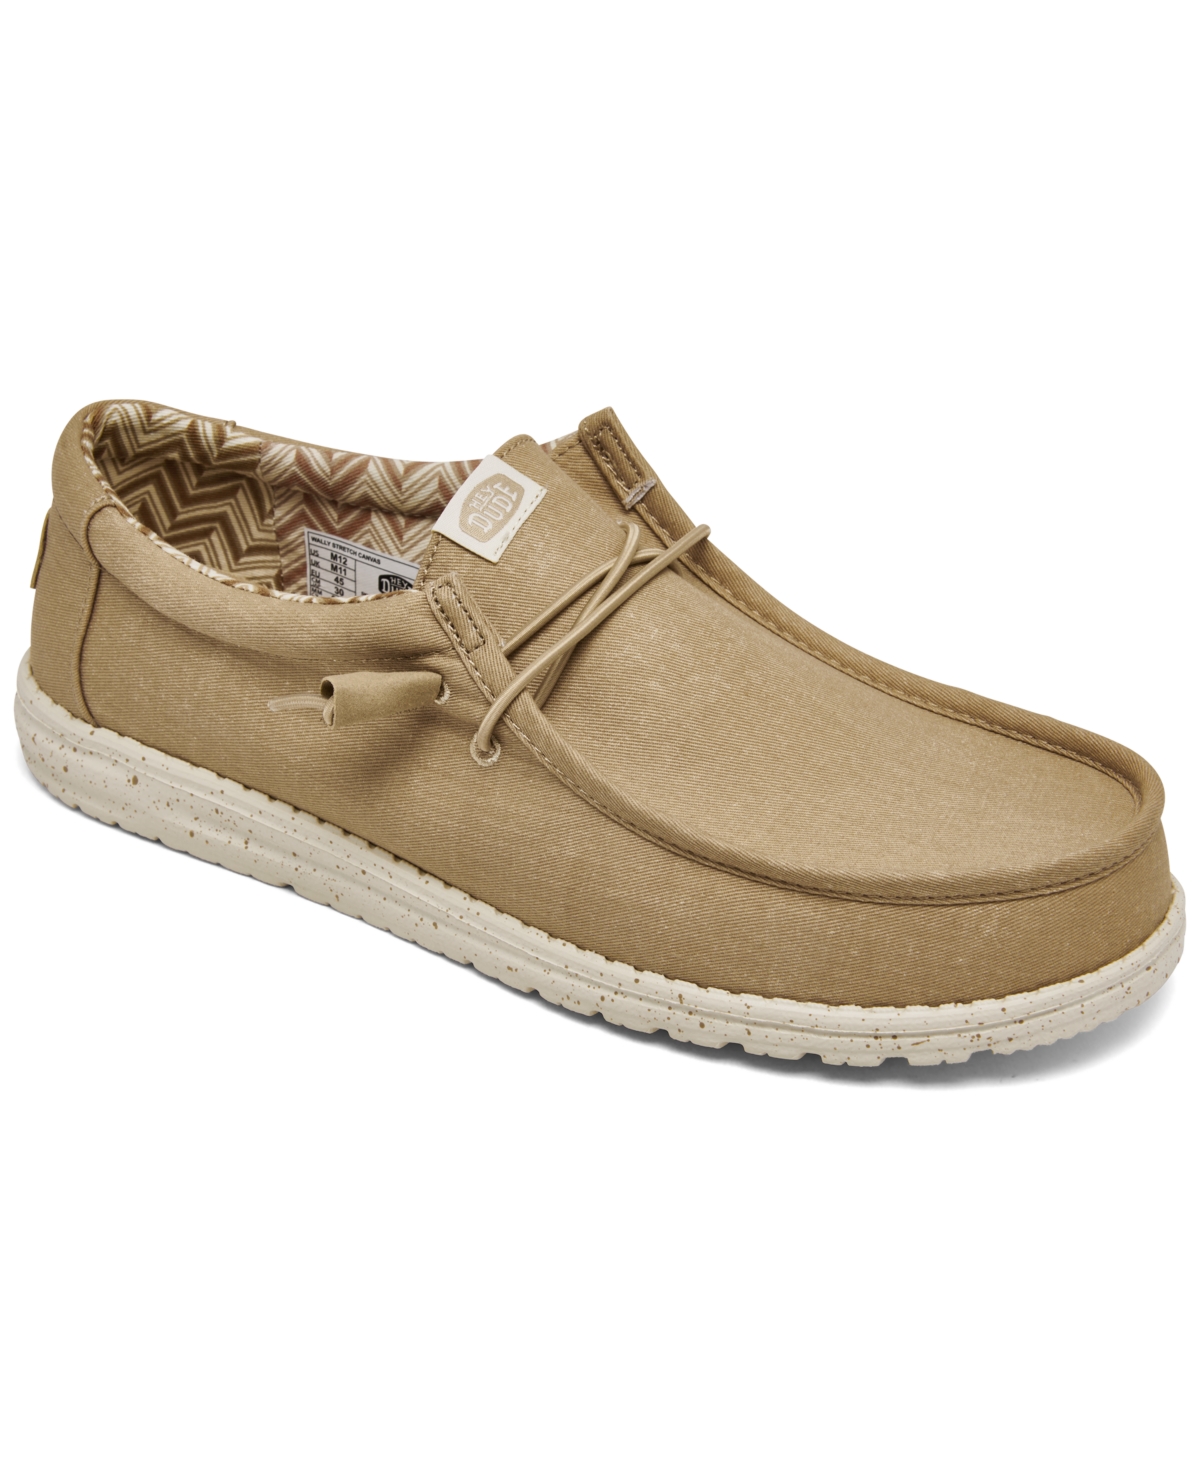 Men's Wally Canvas Casual Moccasin Sneakers from Finish Line - Tan Khaki